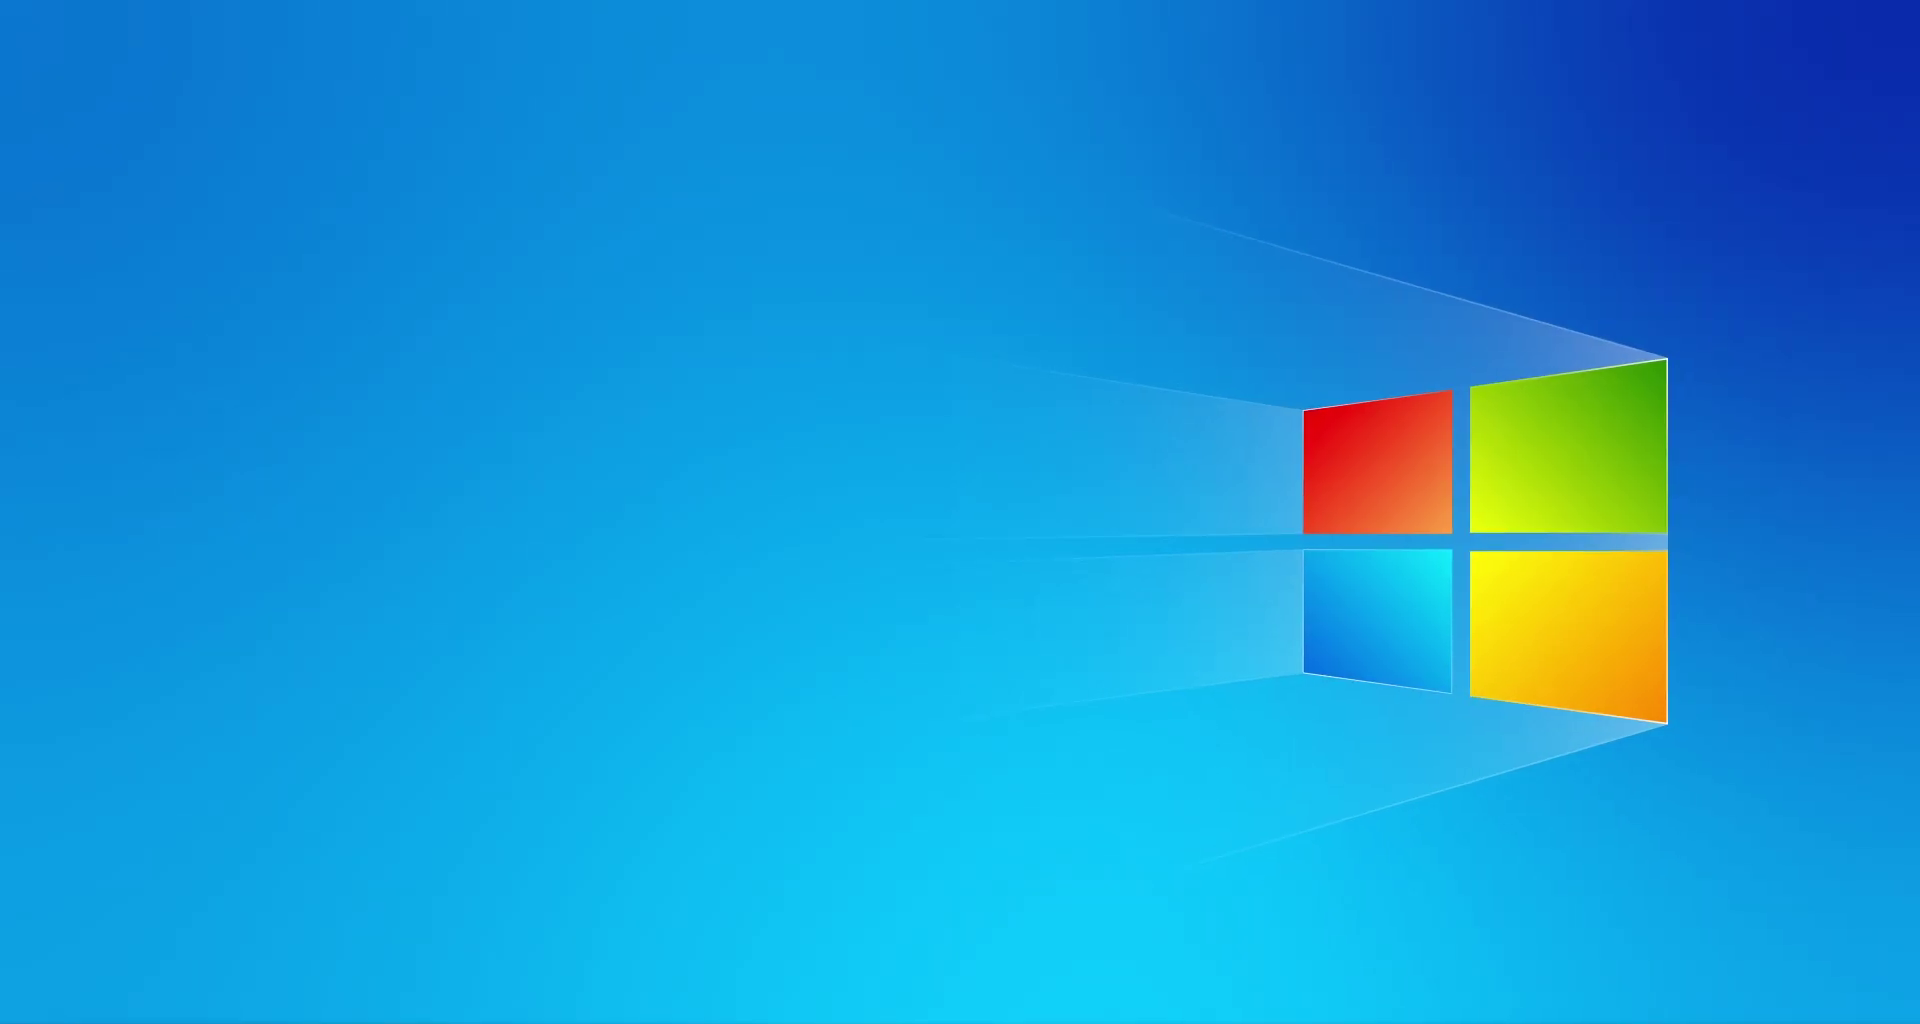 How Much Does Windows 10 Cost?